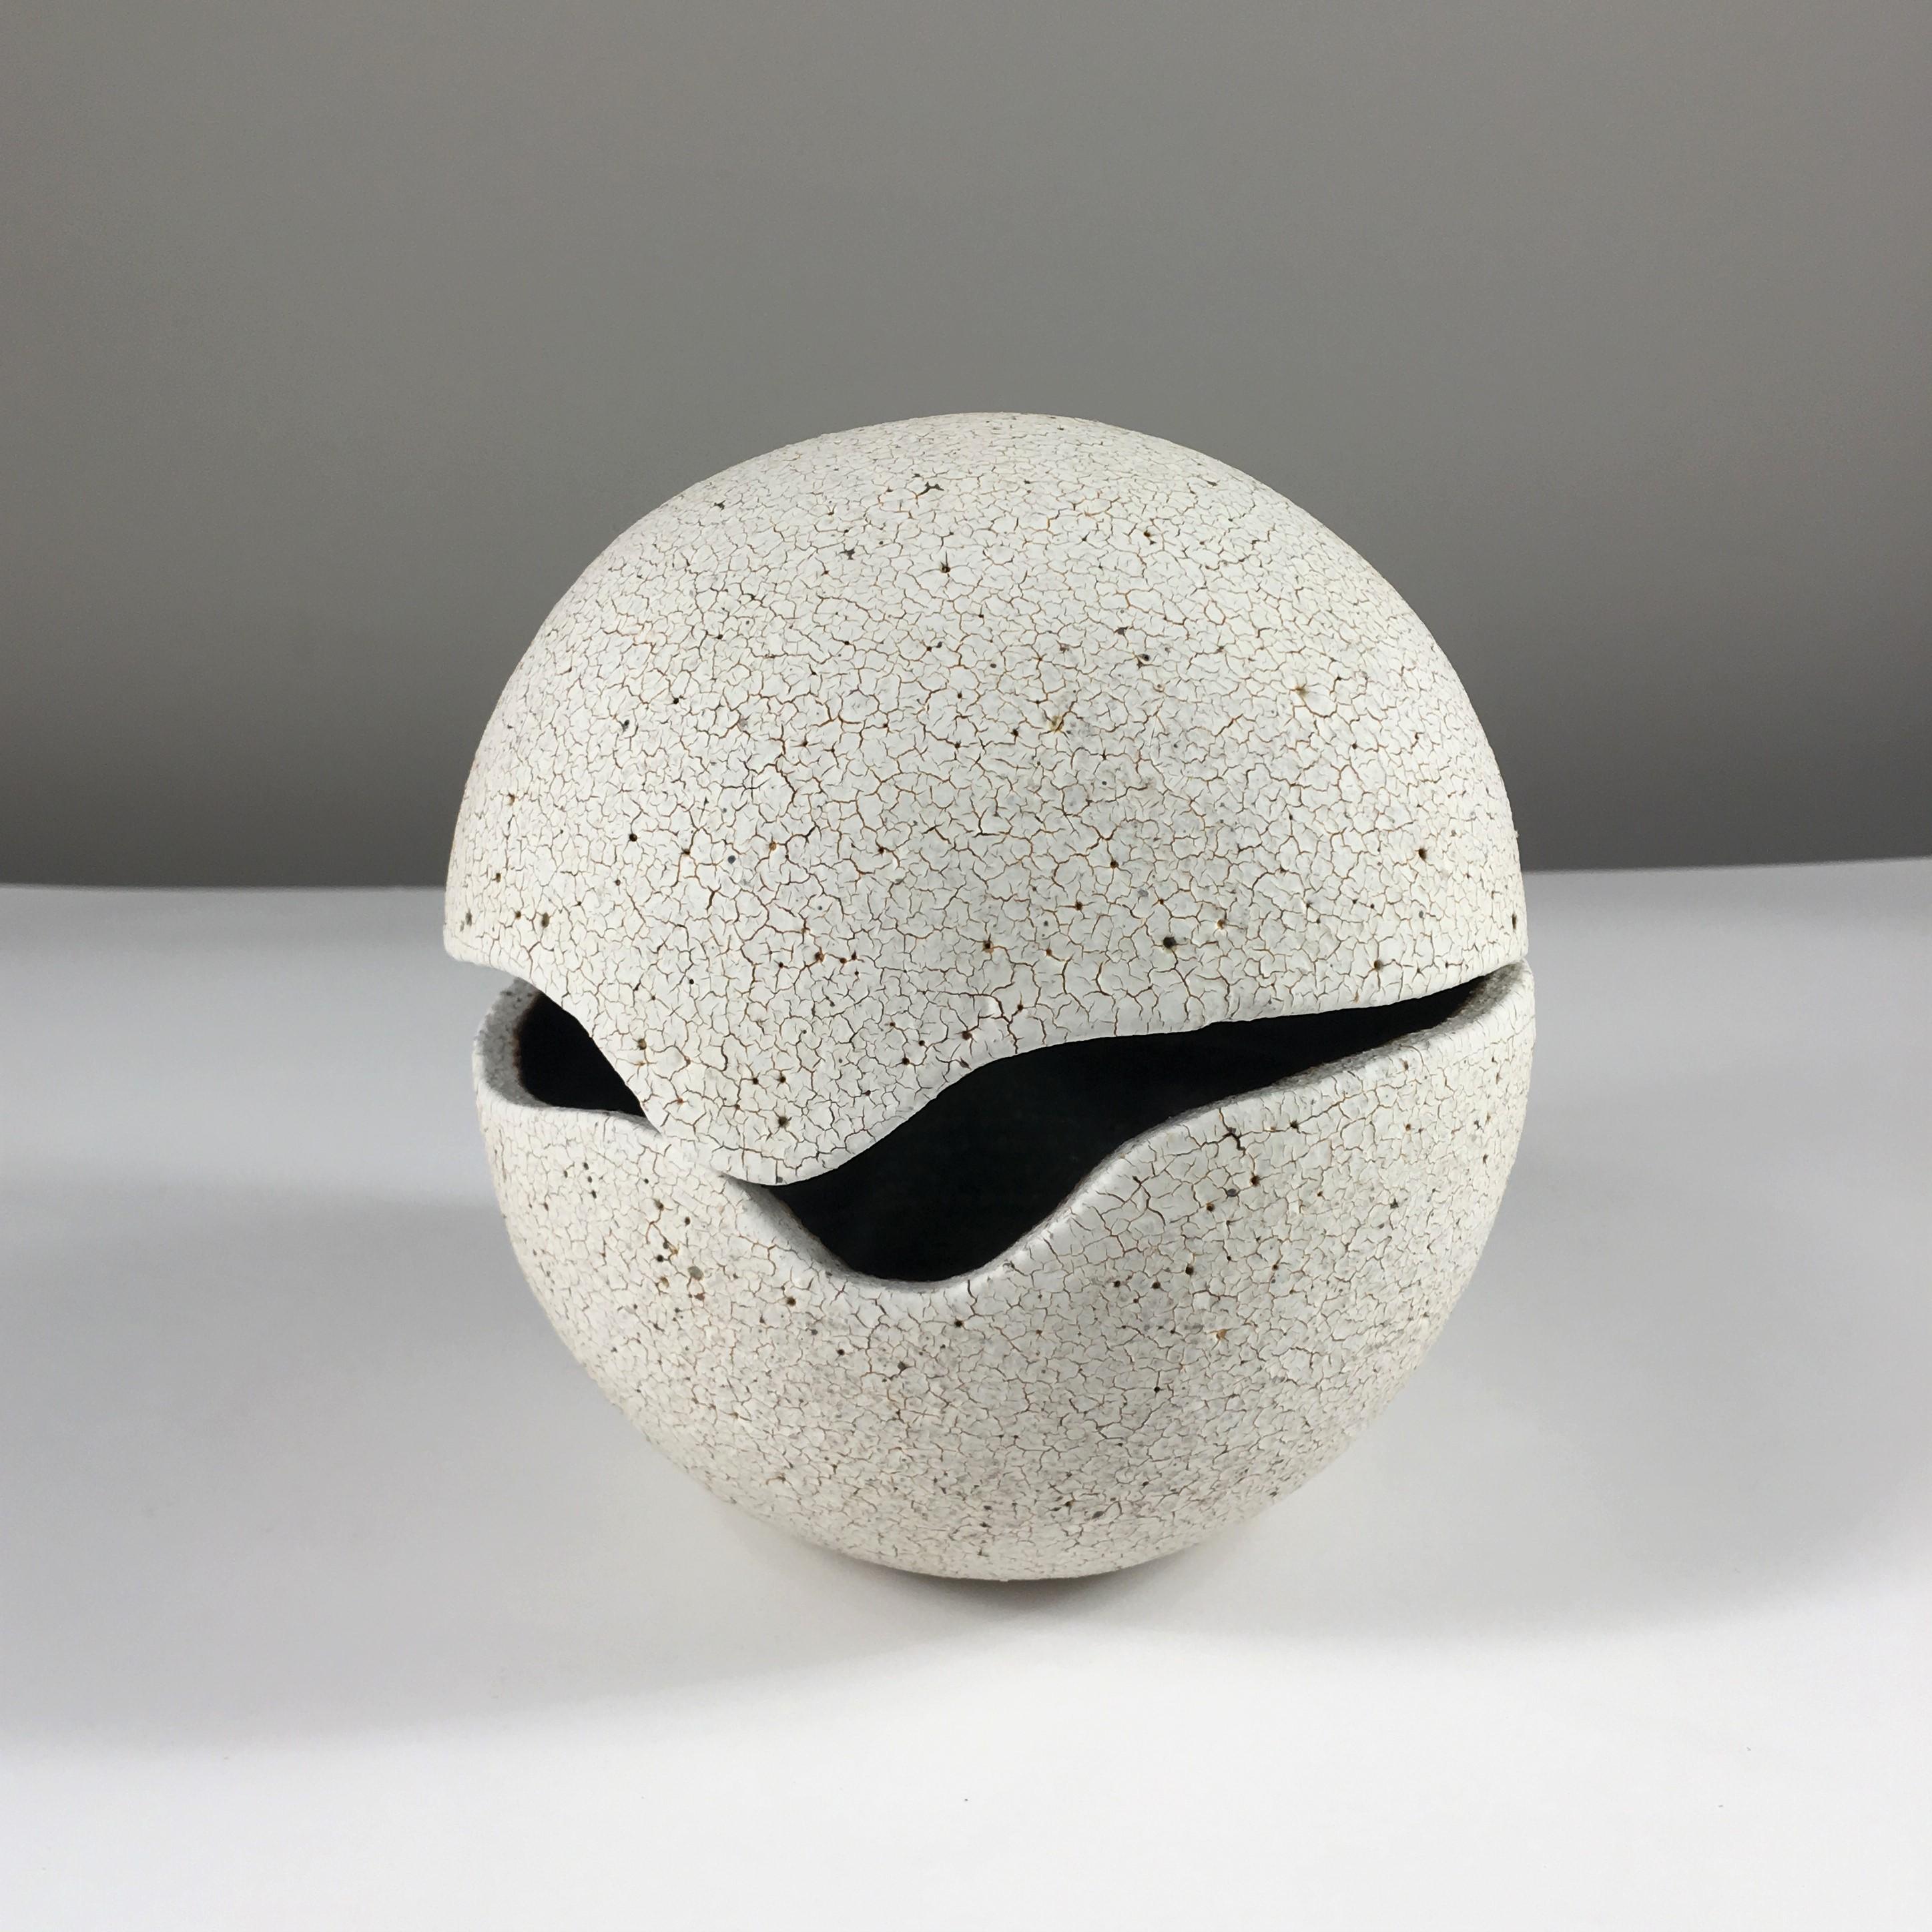 Ceramic orb covered vessel by Yumiko Kuga. Dimensions: Height 5